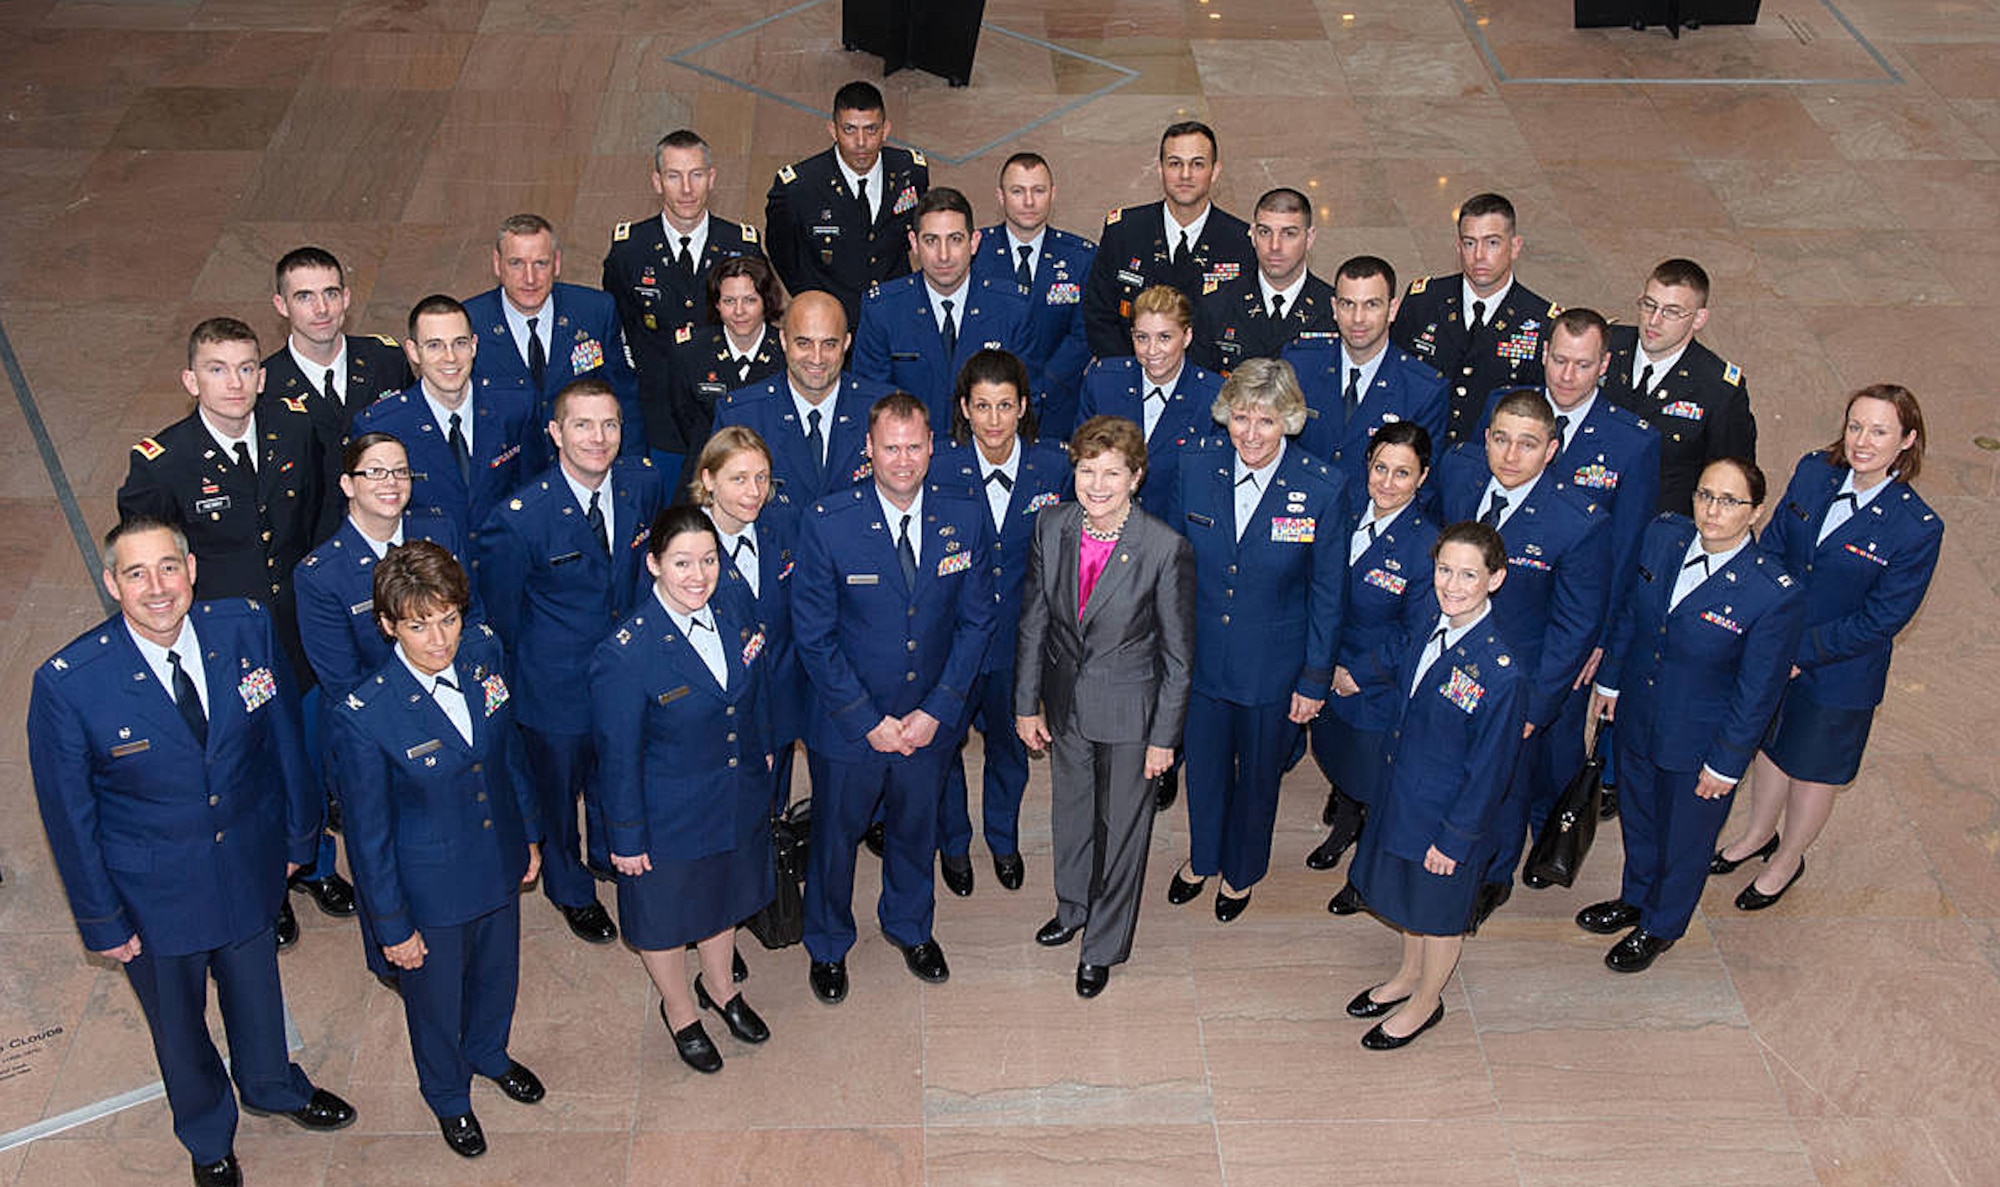 WASHINGTON -- Members of the New Hampshire Air National Guard are pictured with U.S. Senator Jeanne Shaheen during a visit to the Capitol April 30. The visit was part of a two-day CGO Professional Development Tour. (Courtesy Photo/Released)